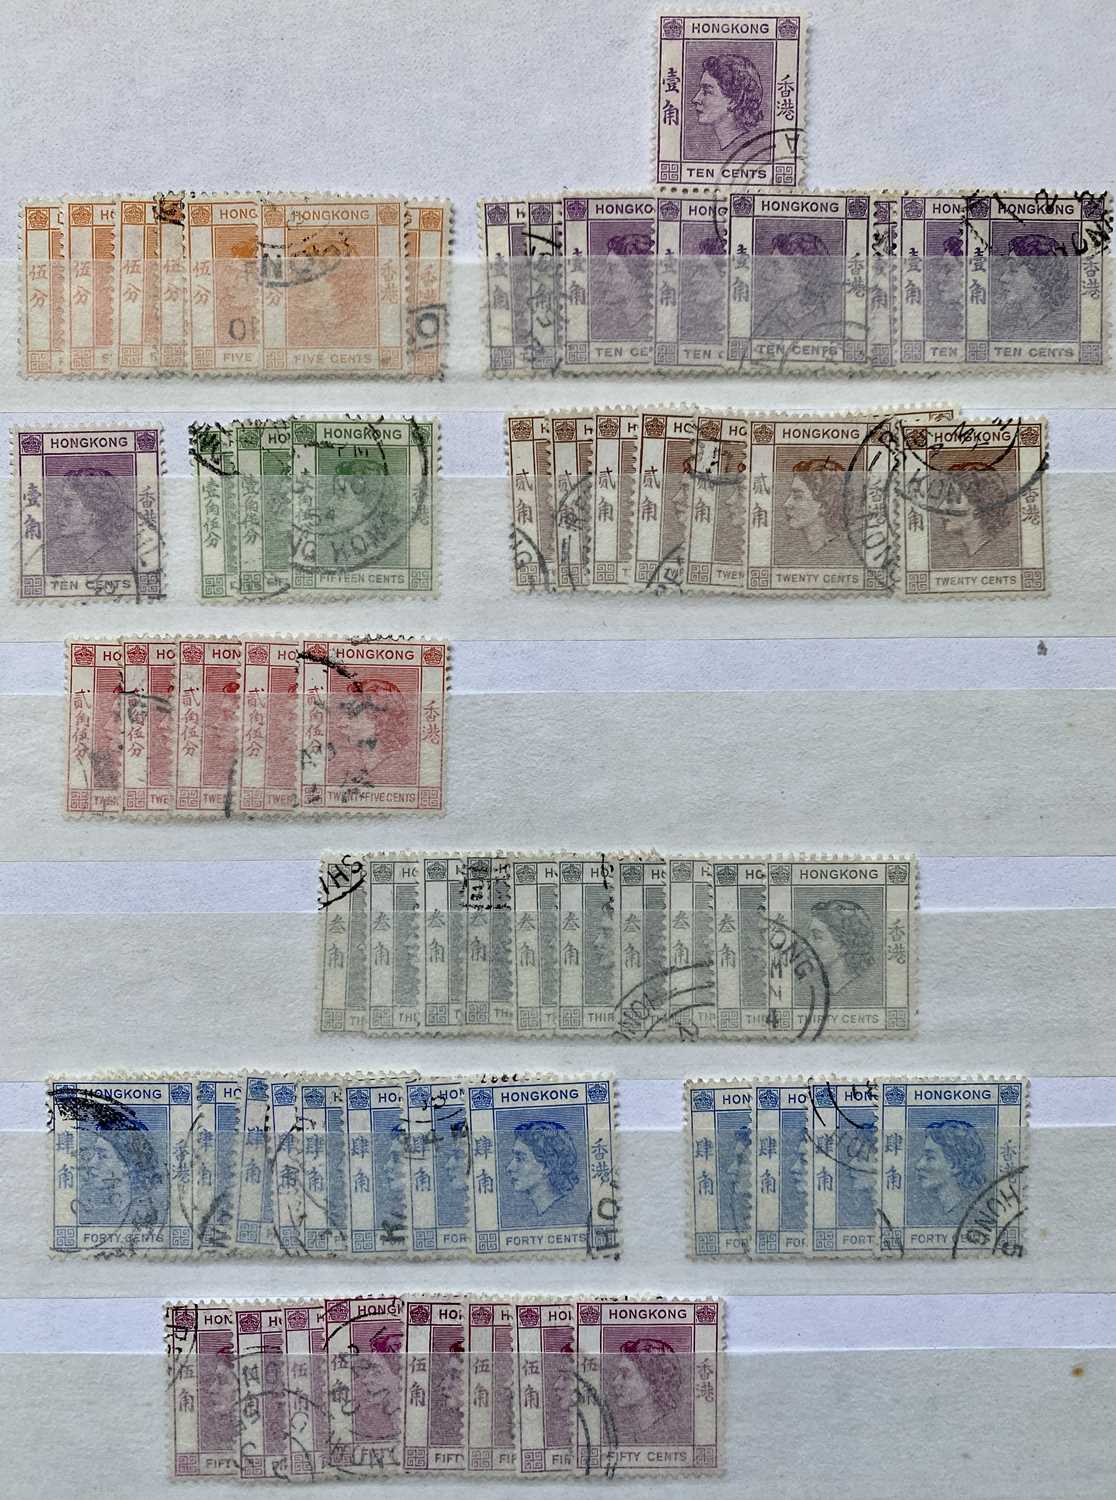 VERY GOOD HONG KONG UNMOUNTED MINT & FINE USED HIGH CAT VALUE, OVERPRINTS ETC - Image 15 of 19